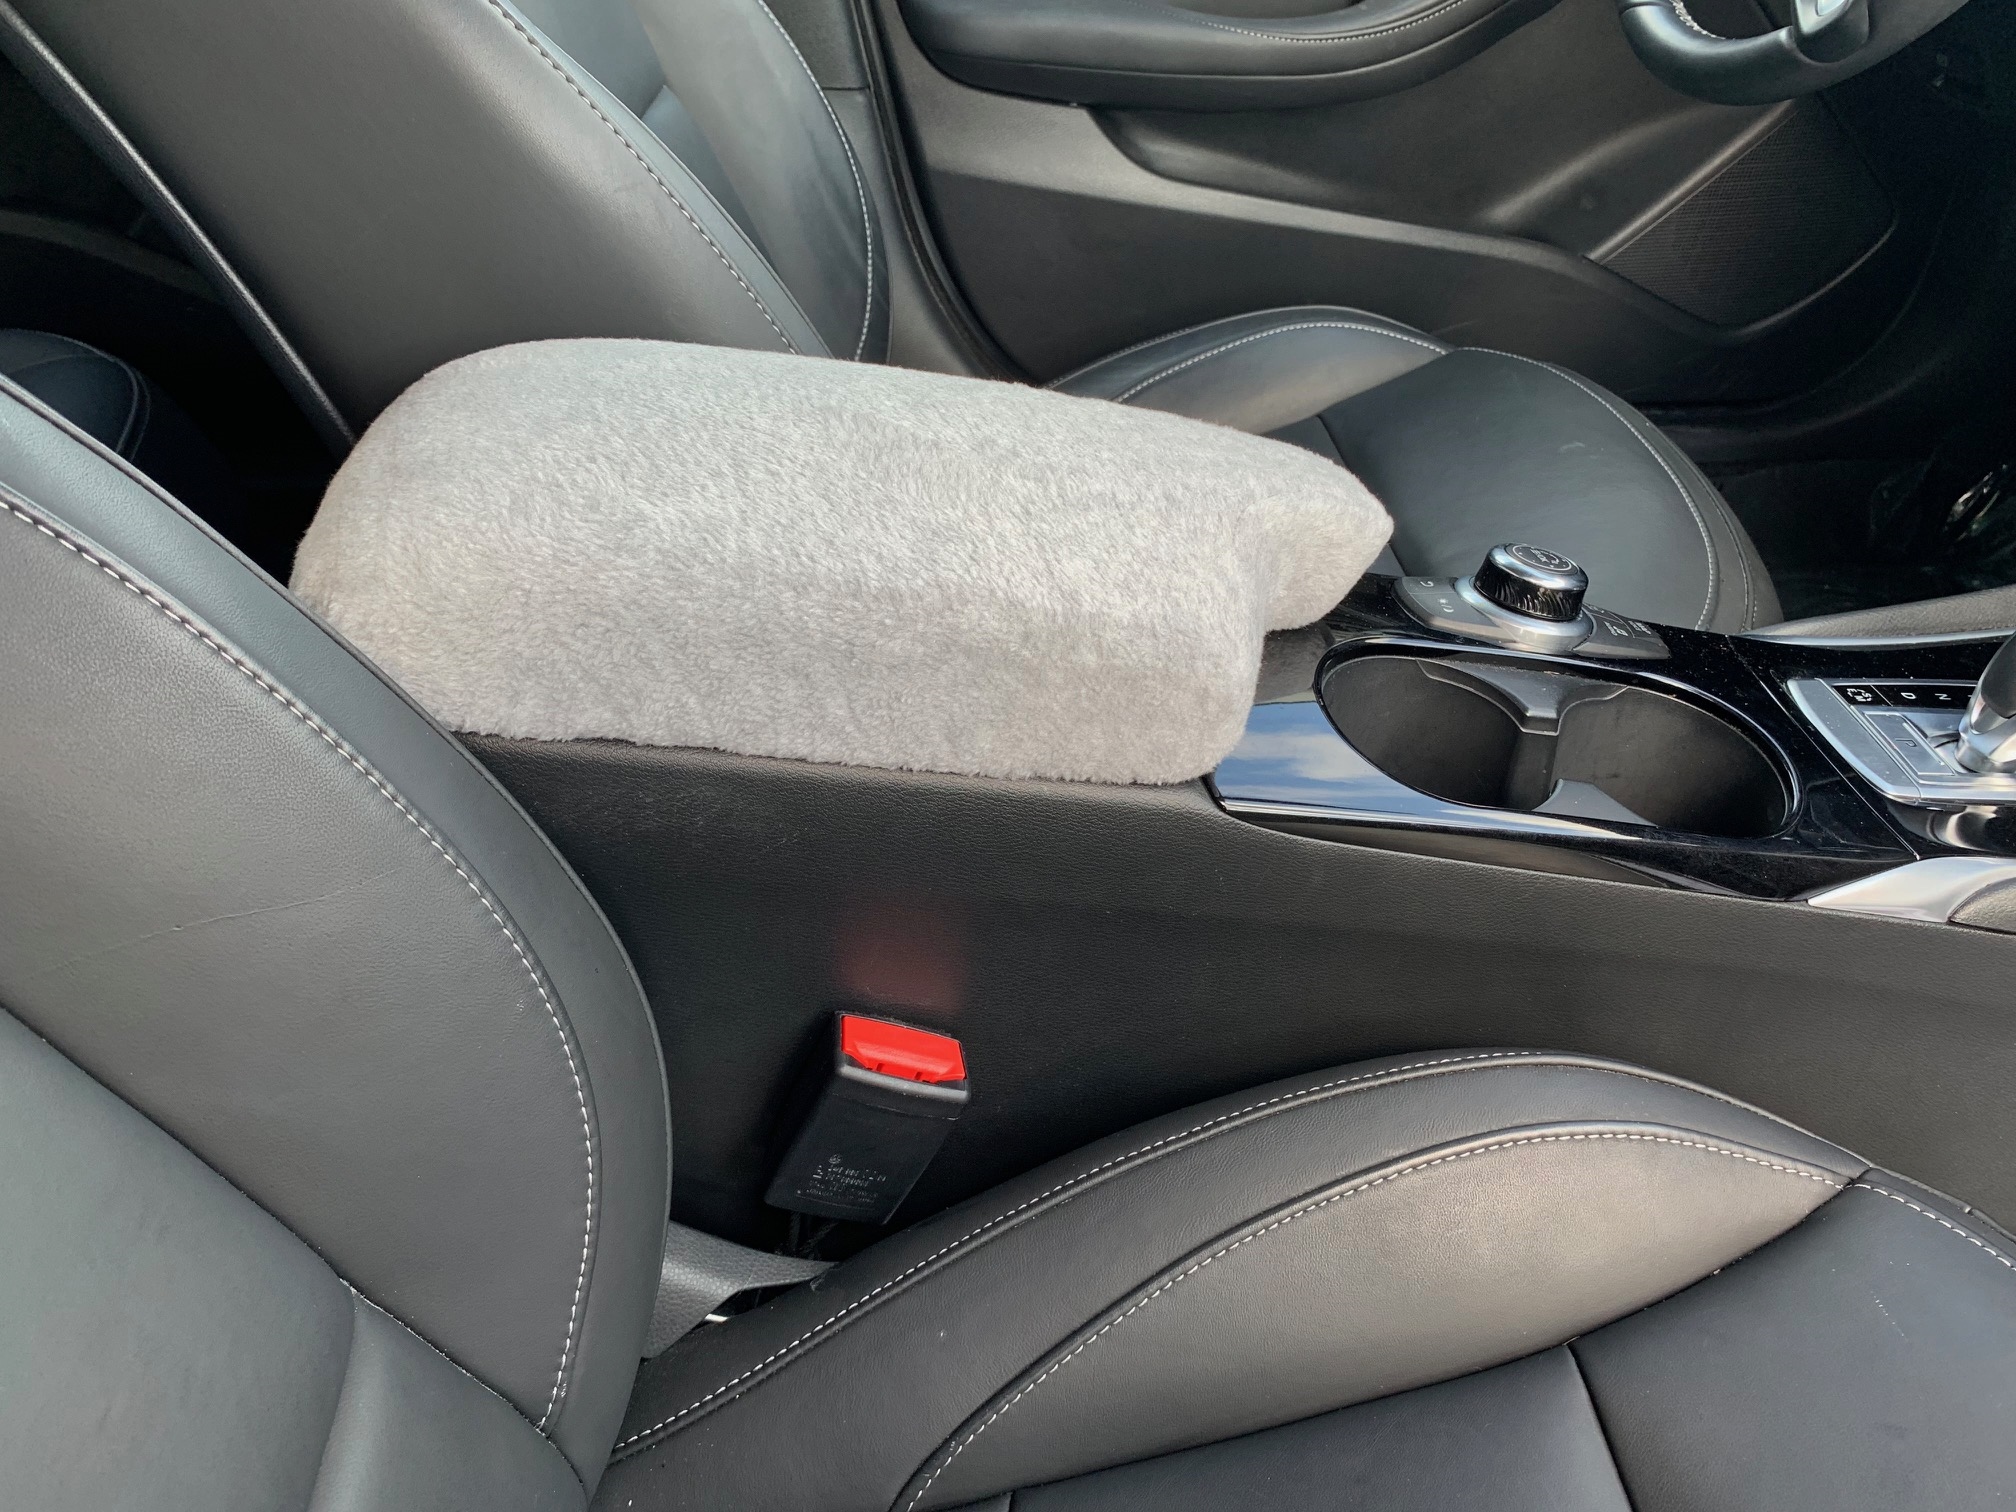 Buy Fleece Center Console Armrest Cover fits the Hyundai Palisade 20202021